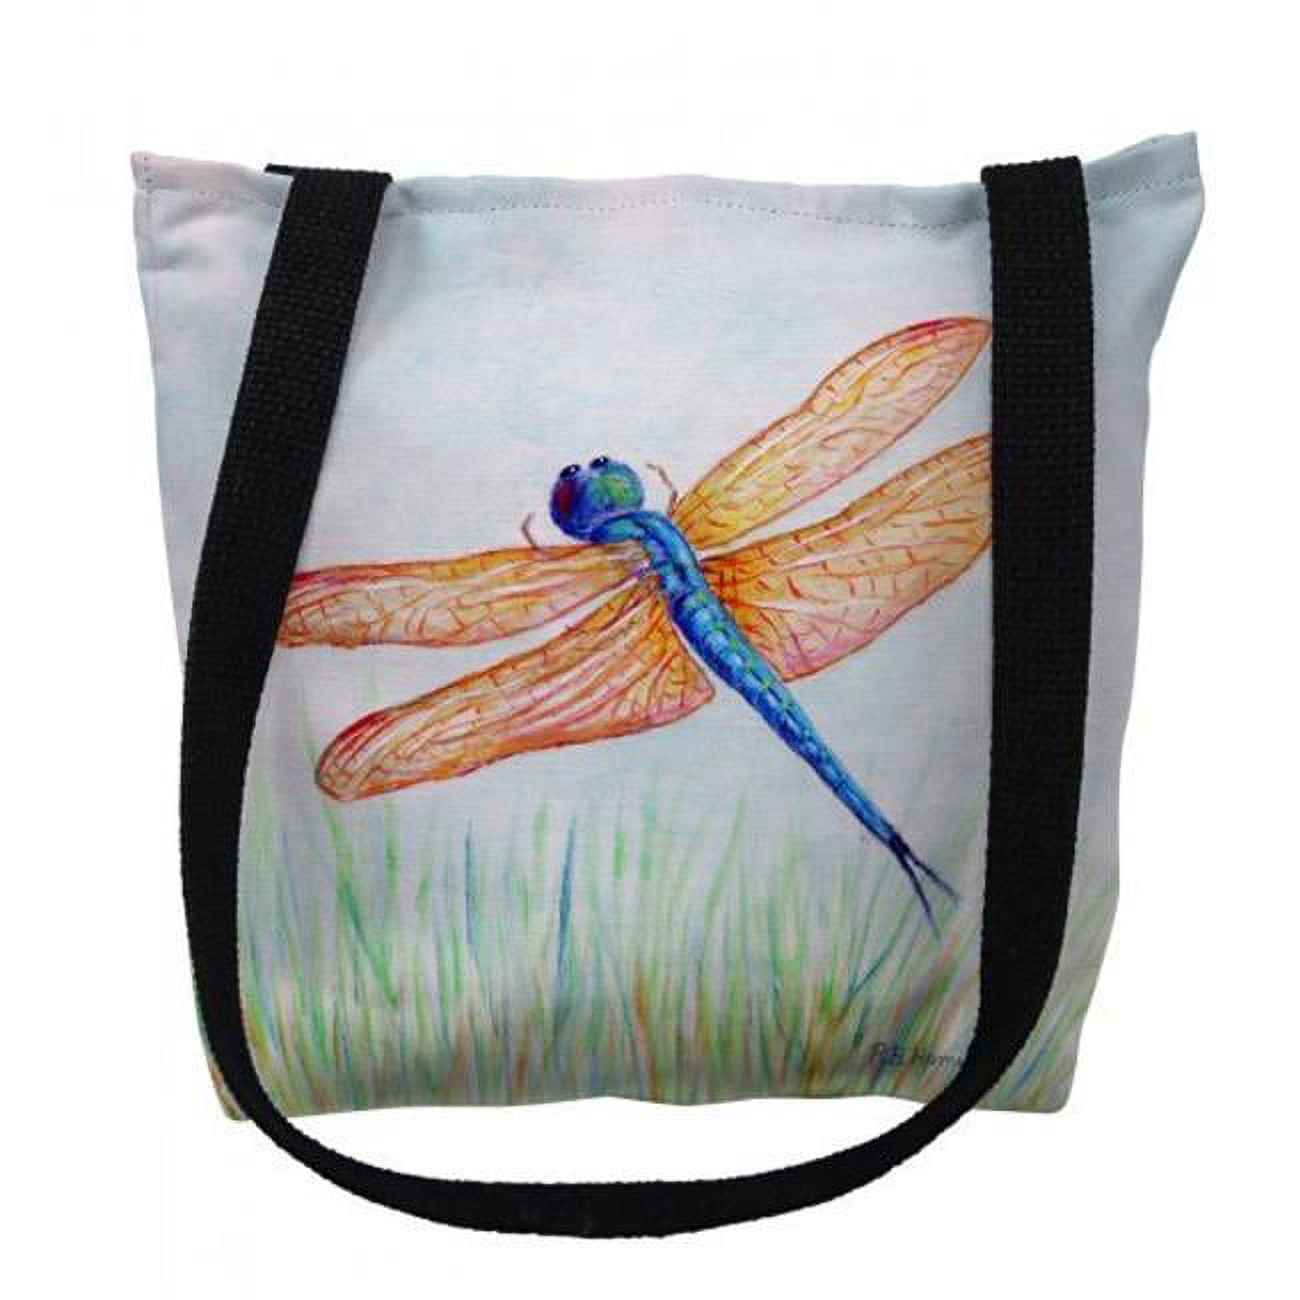 Ty1045m 16 X 16 In. Amber & Blue Dragonfly Tote Bag - Medium